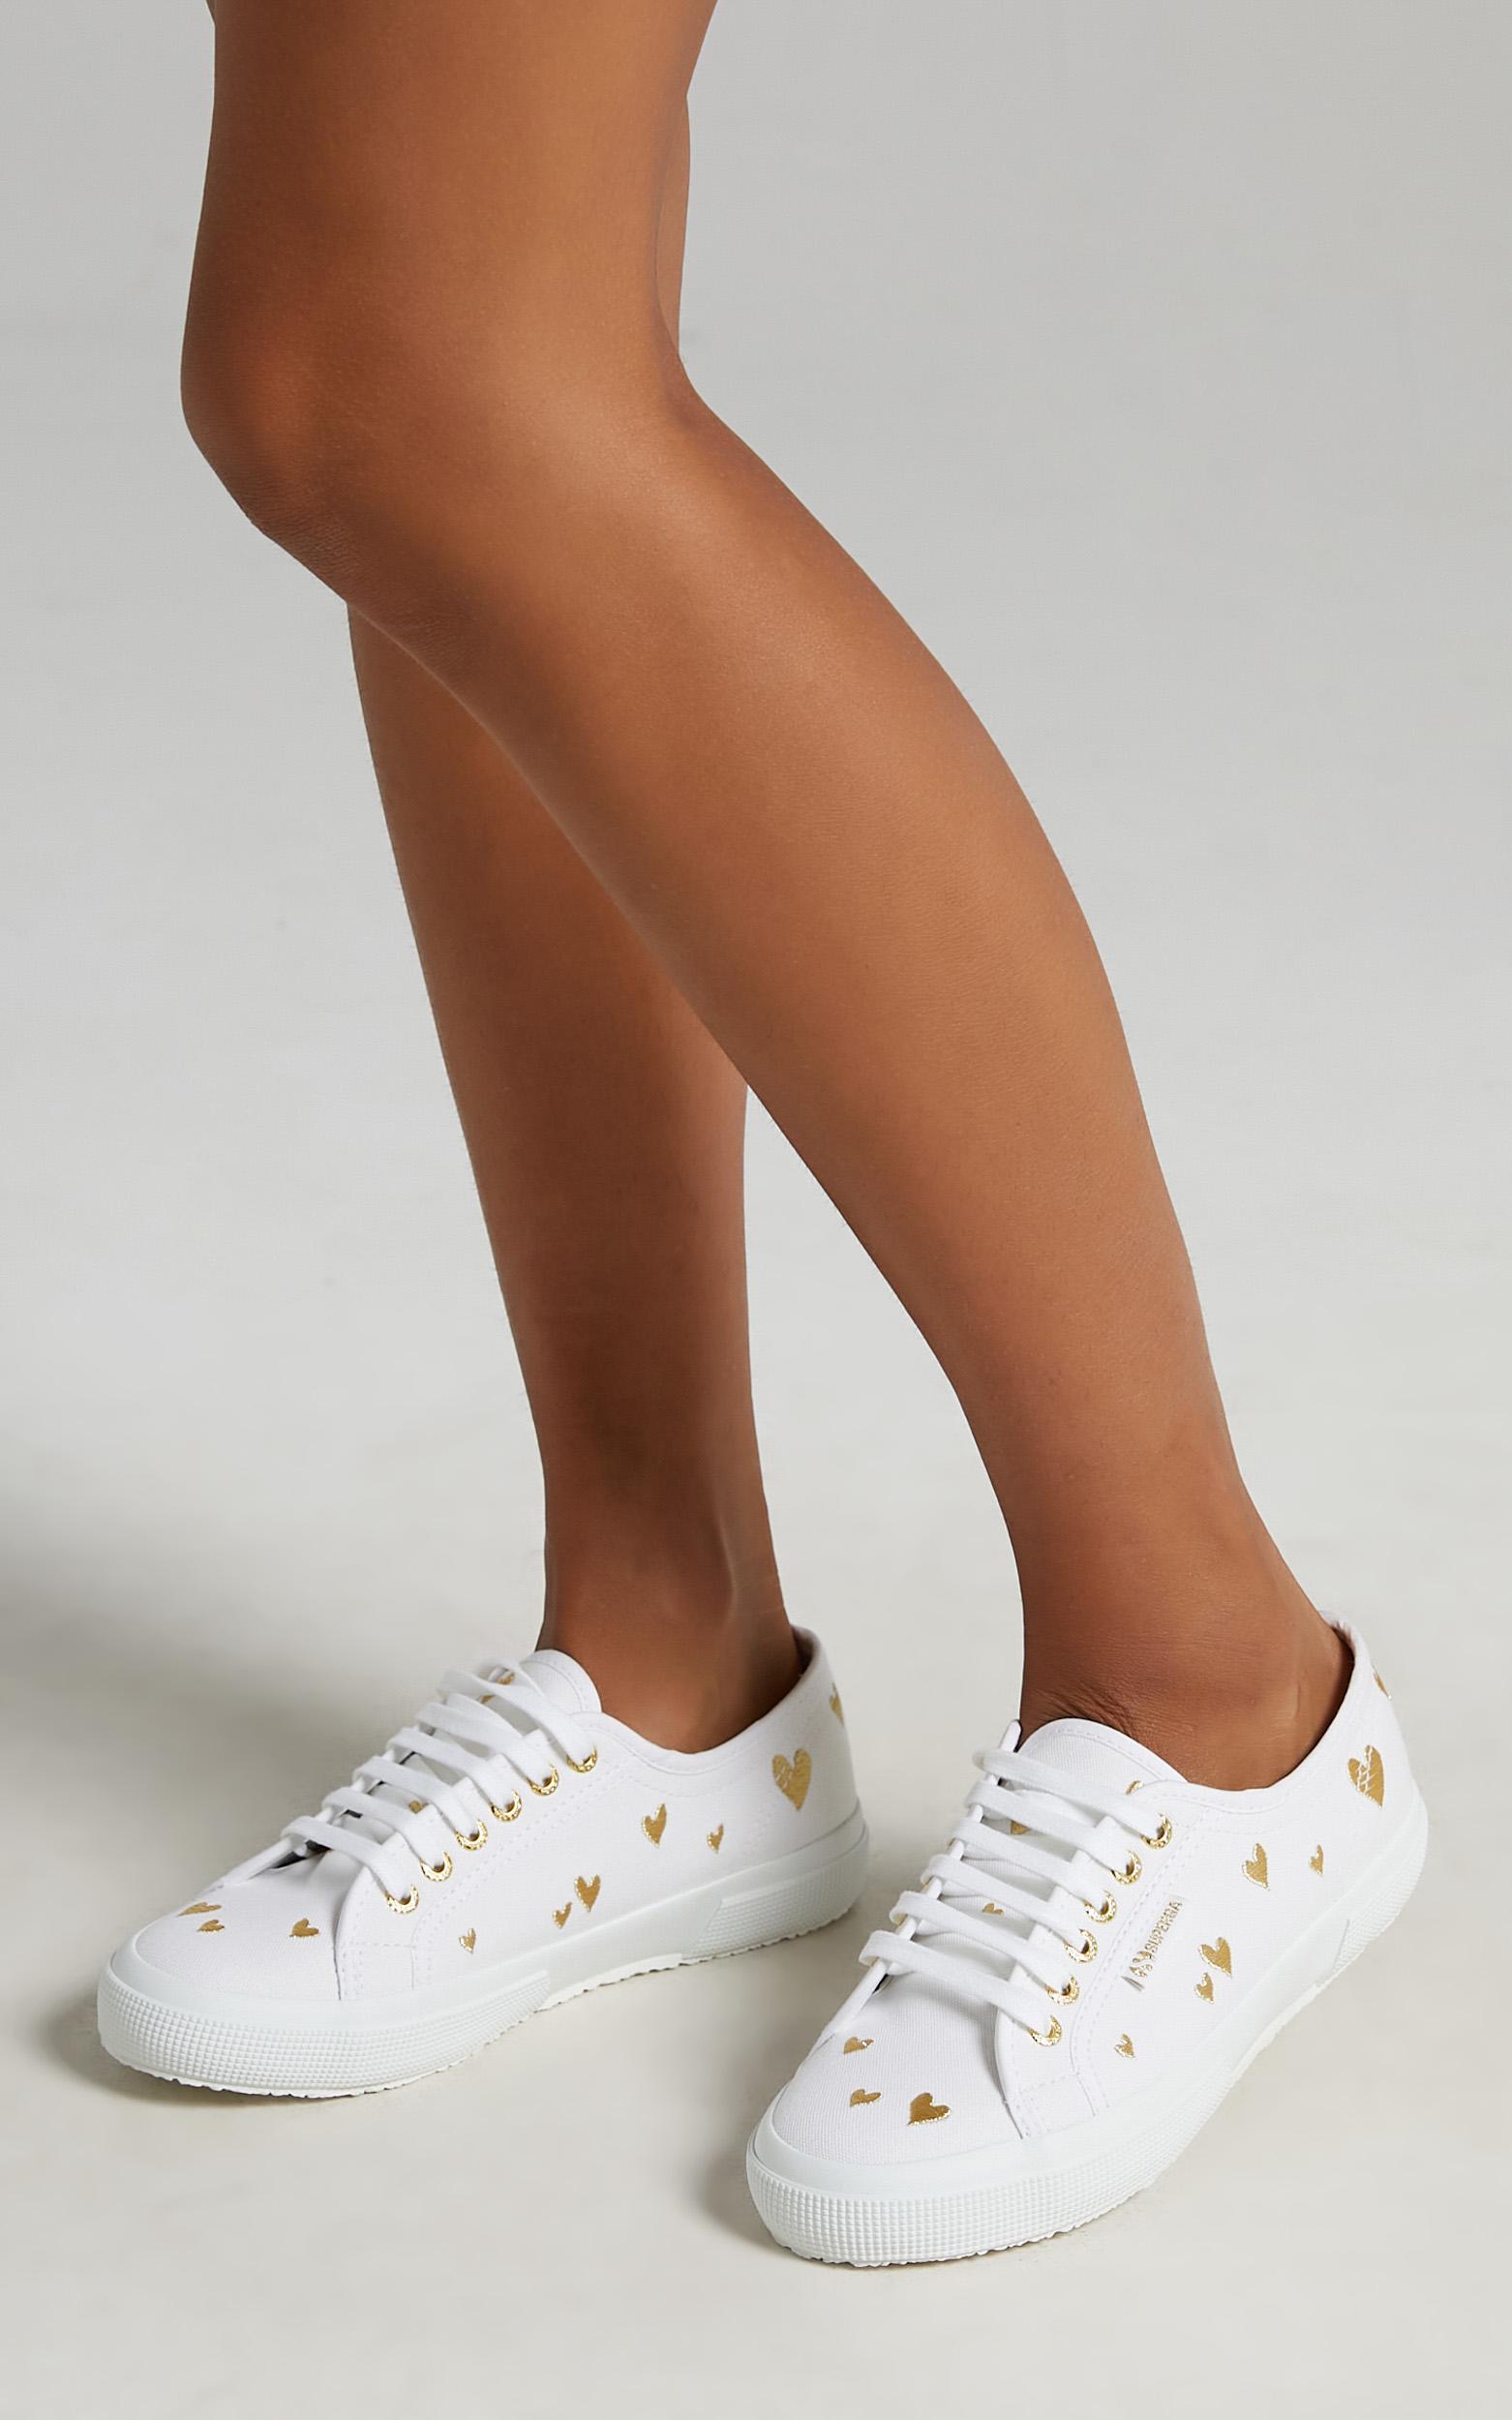 Superga - 2750 Hearts Embroidery Sneakers in A1Z White - Gold Hearts - 05, WHT1, hi-res image number null